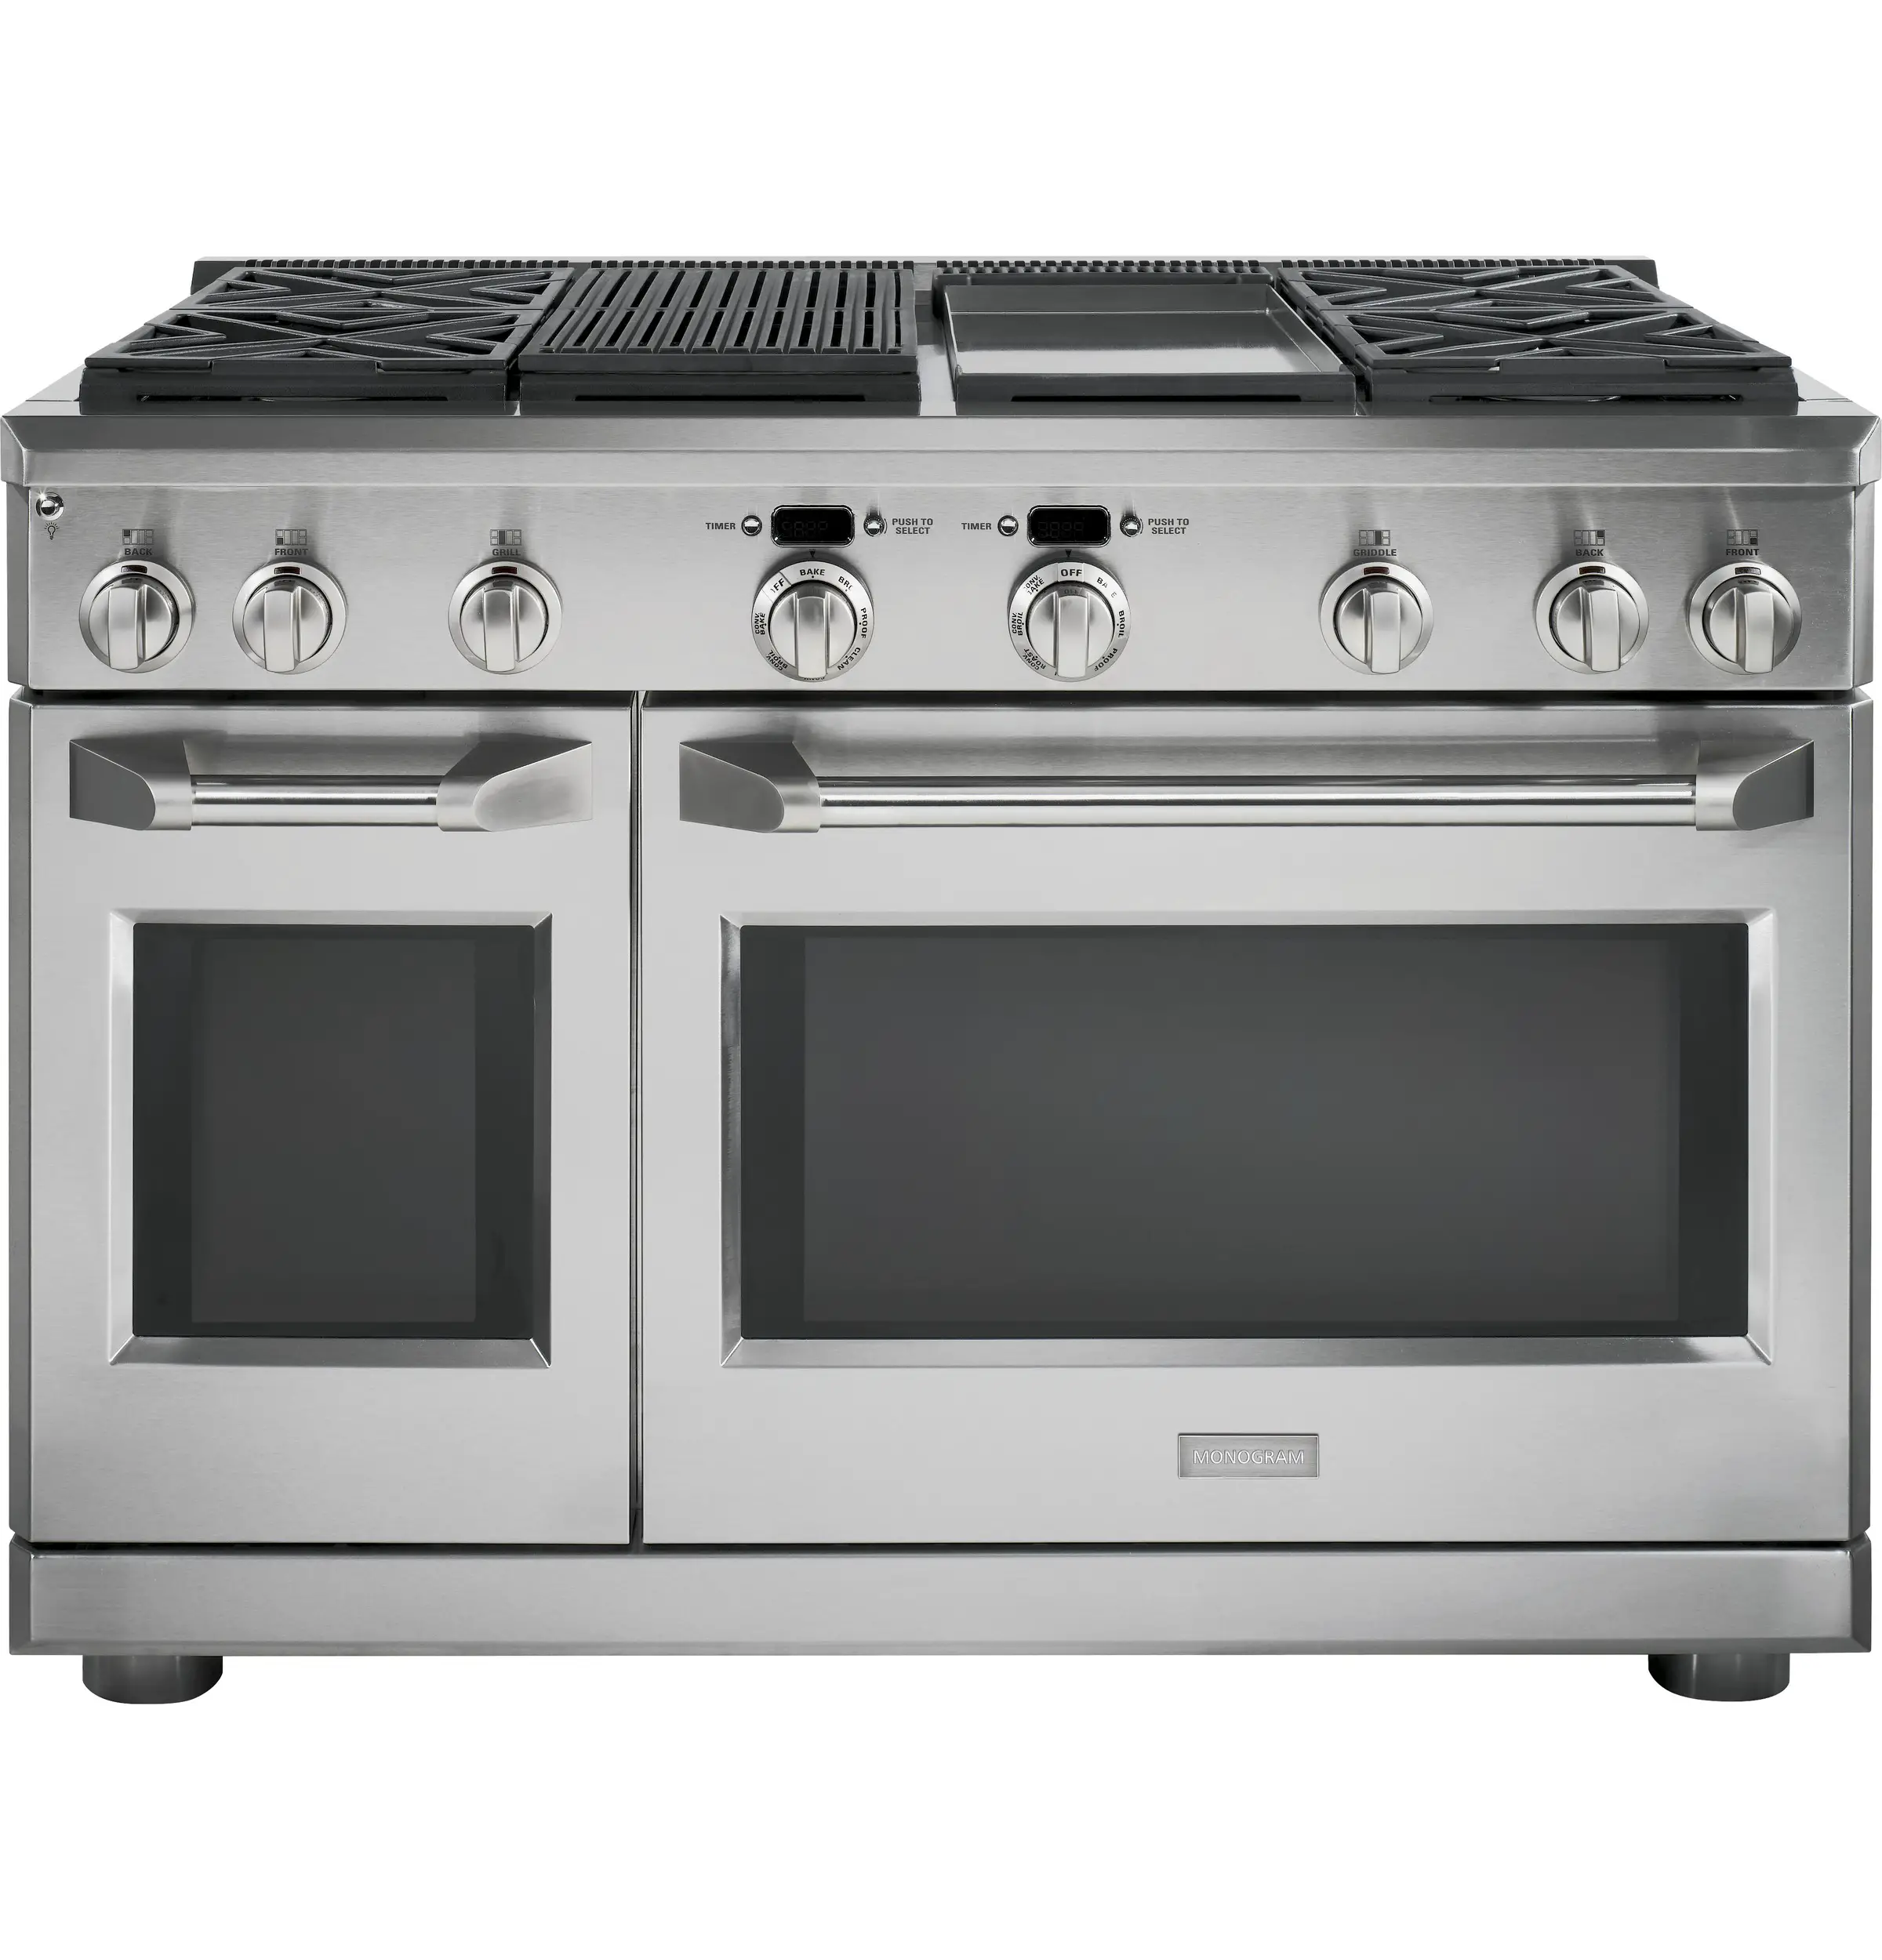 MonogramÂ® 48"  All Gas Professional Range with 4 Burners, Grill, and ...